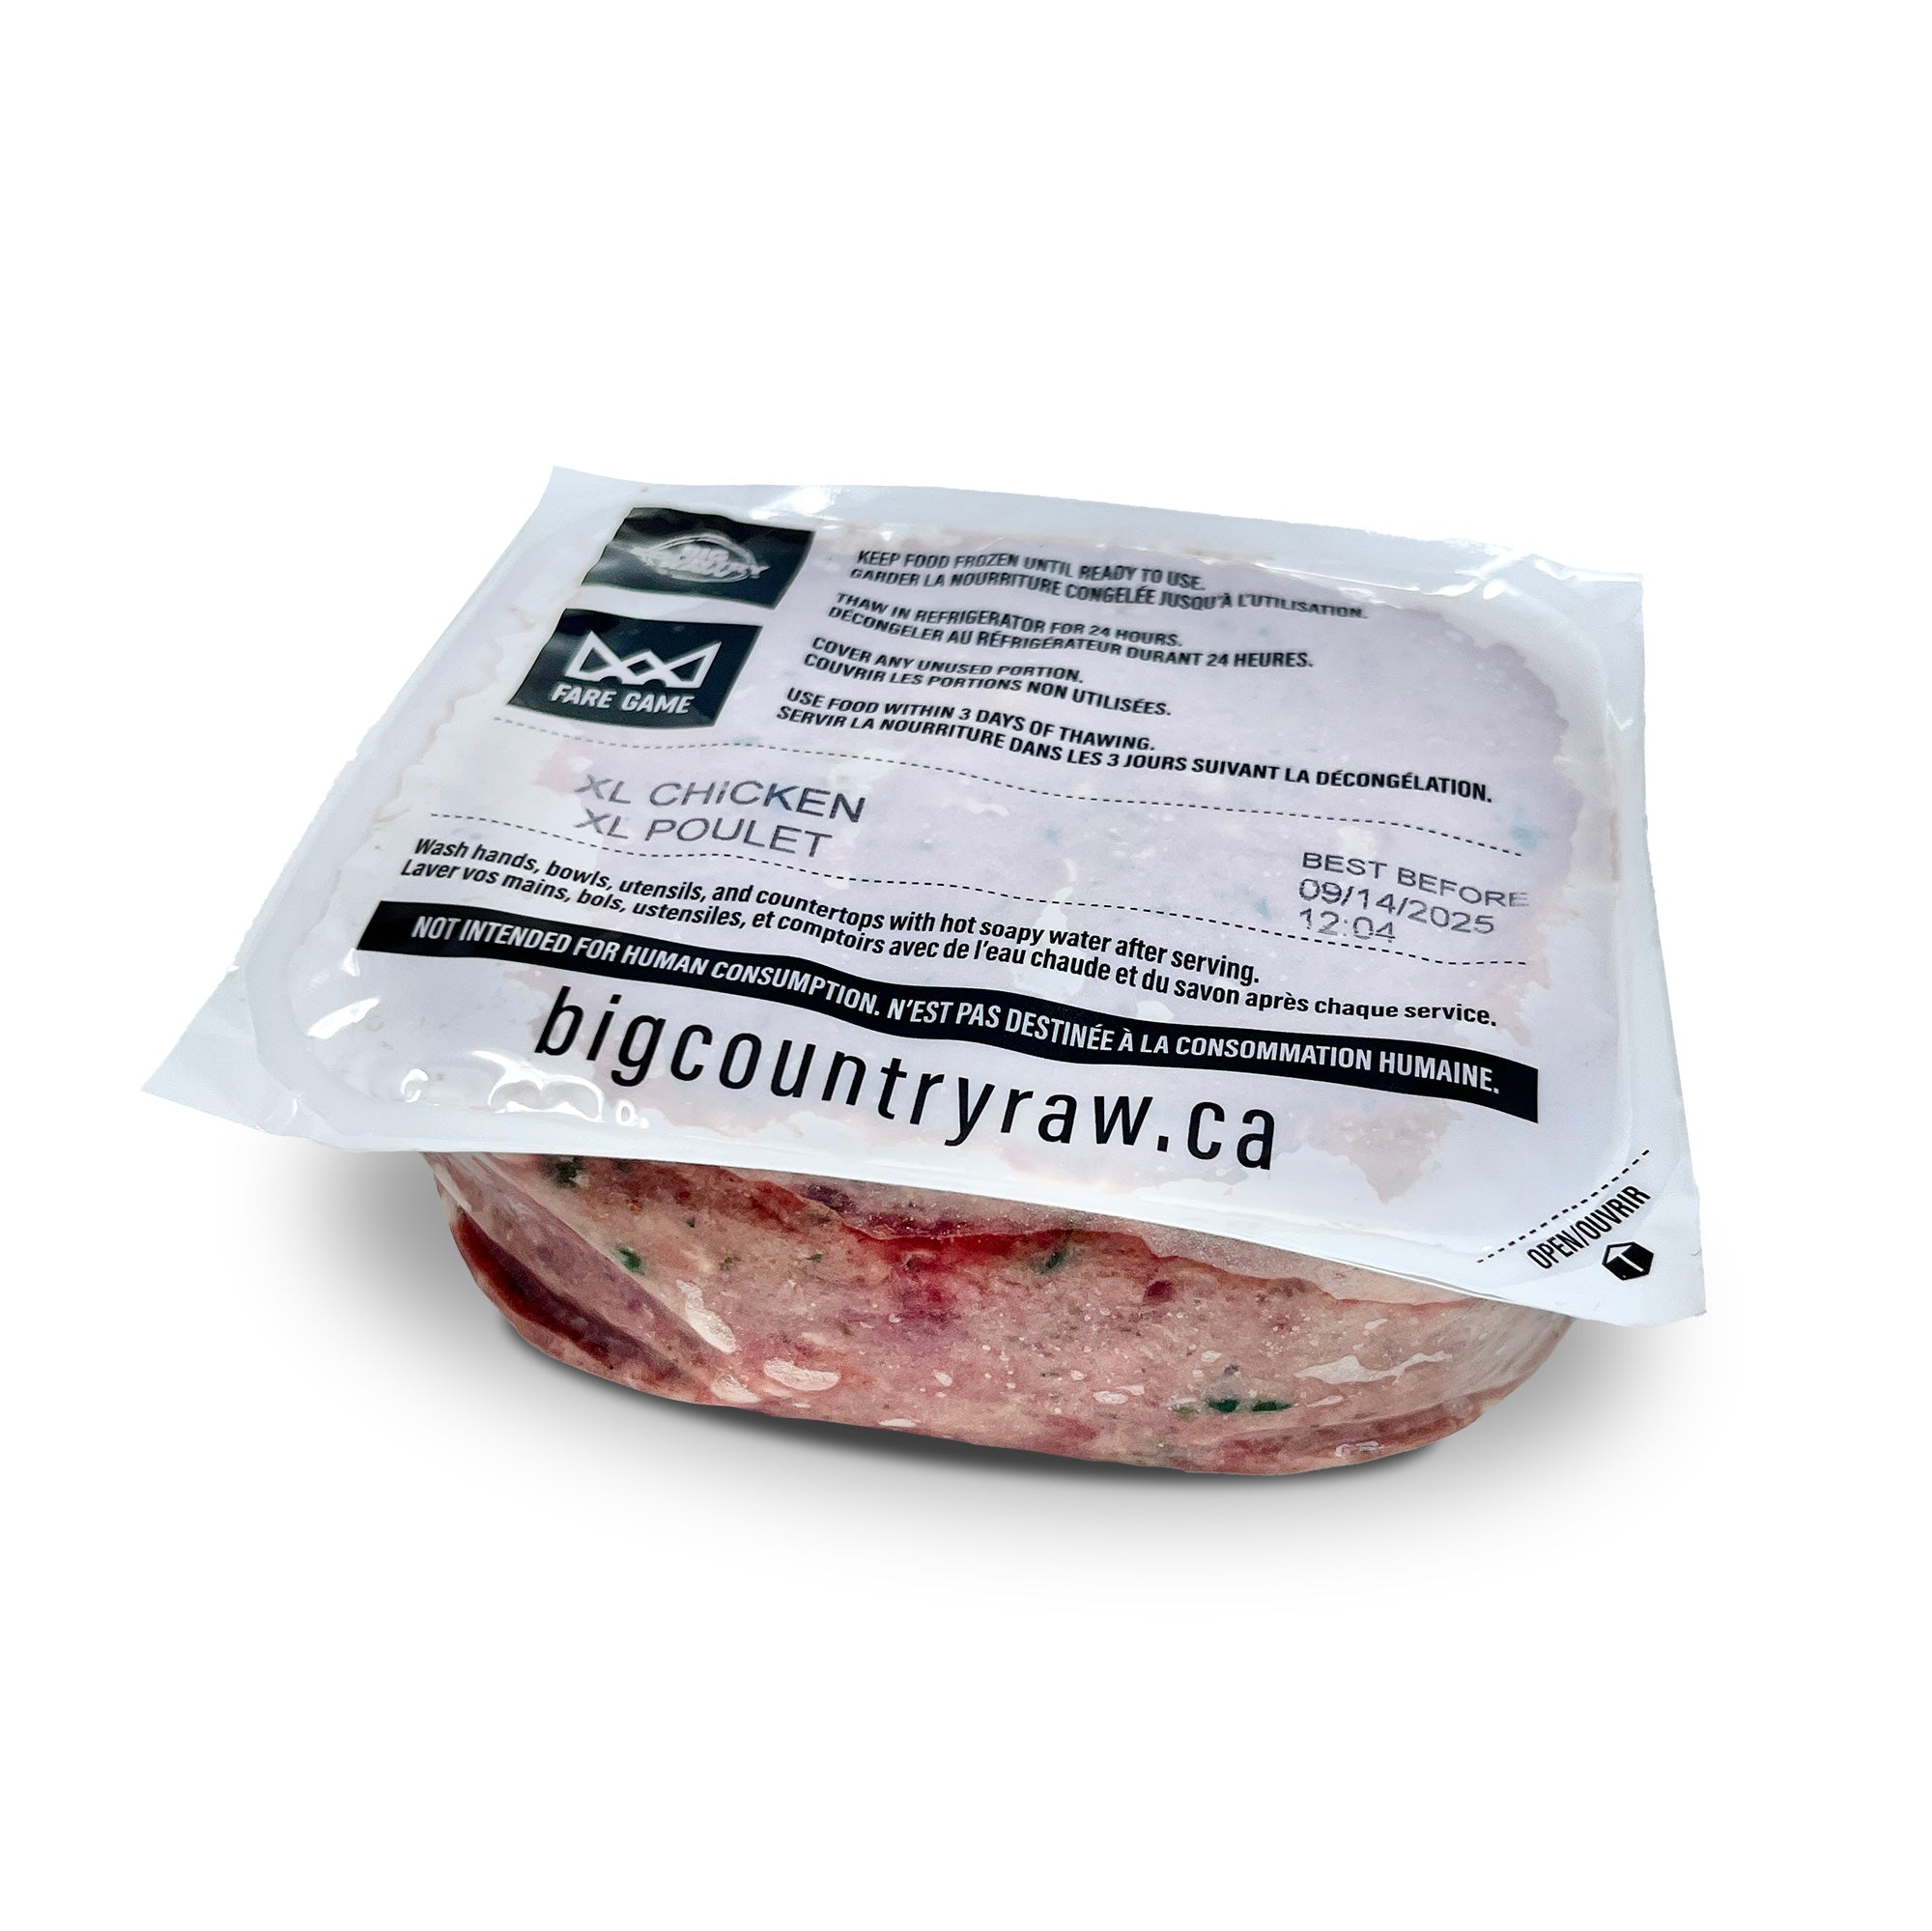 Big Country Raw - XL Bistro (30lb) - Frozen Product